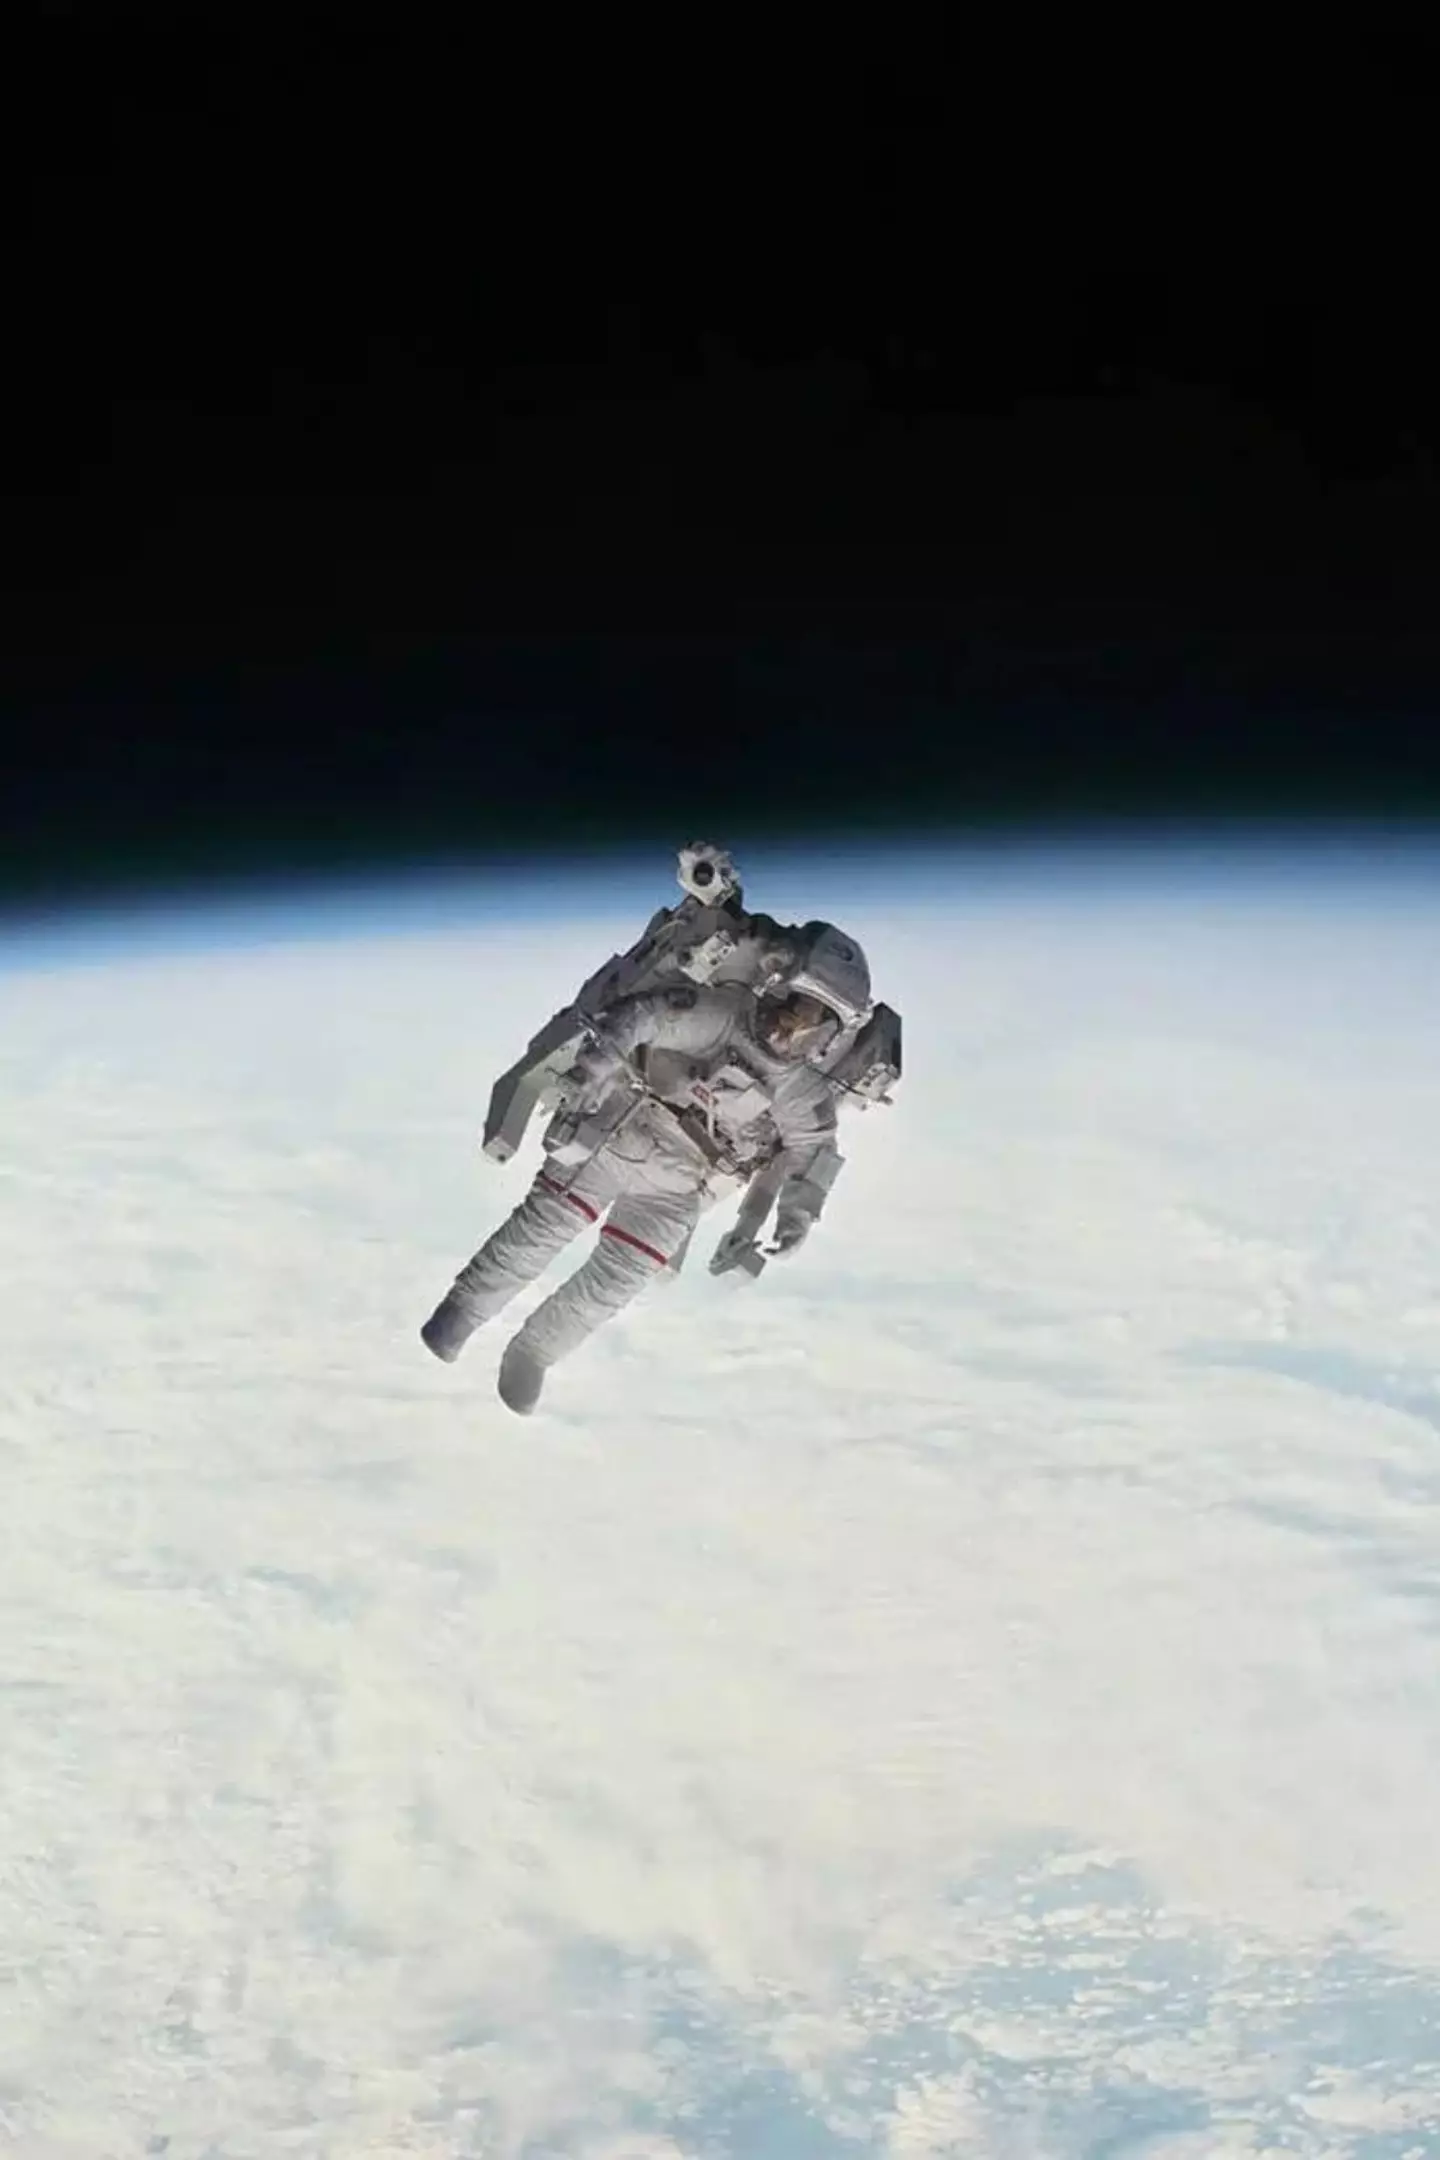 The astronaut claimed he didn't know how fast he was moving. (Nasa/MMU)